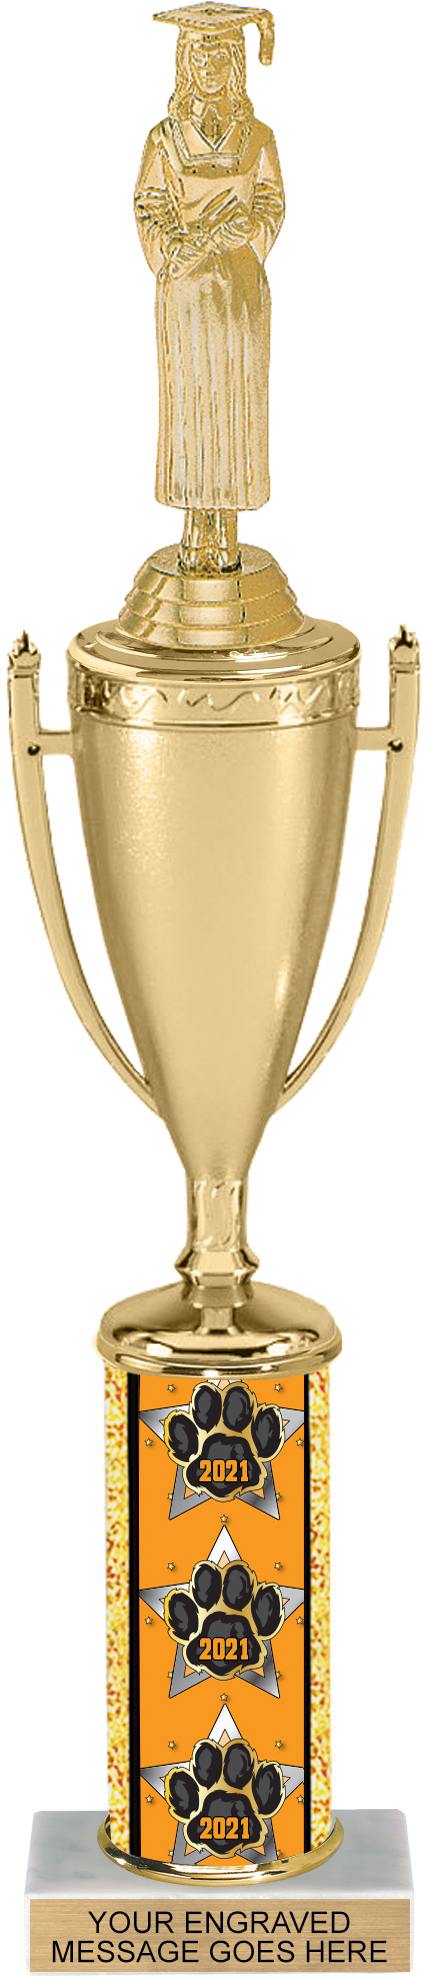 Paw Column Cup Trophy for Year - 15 inch